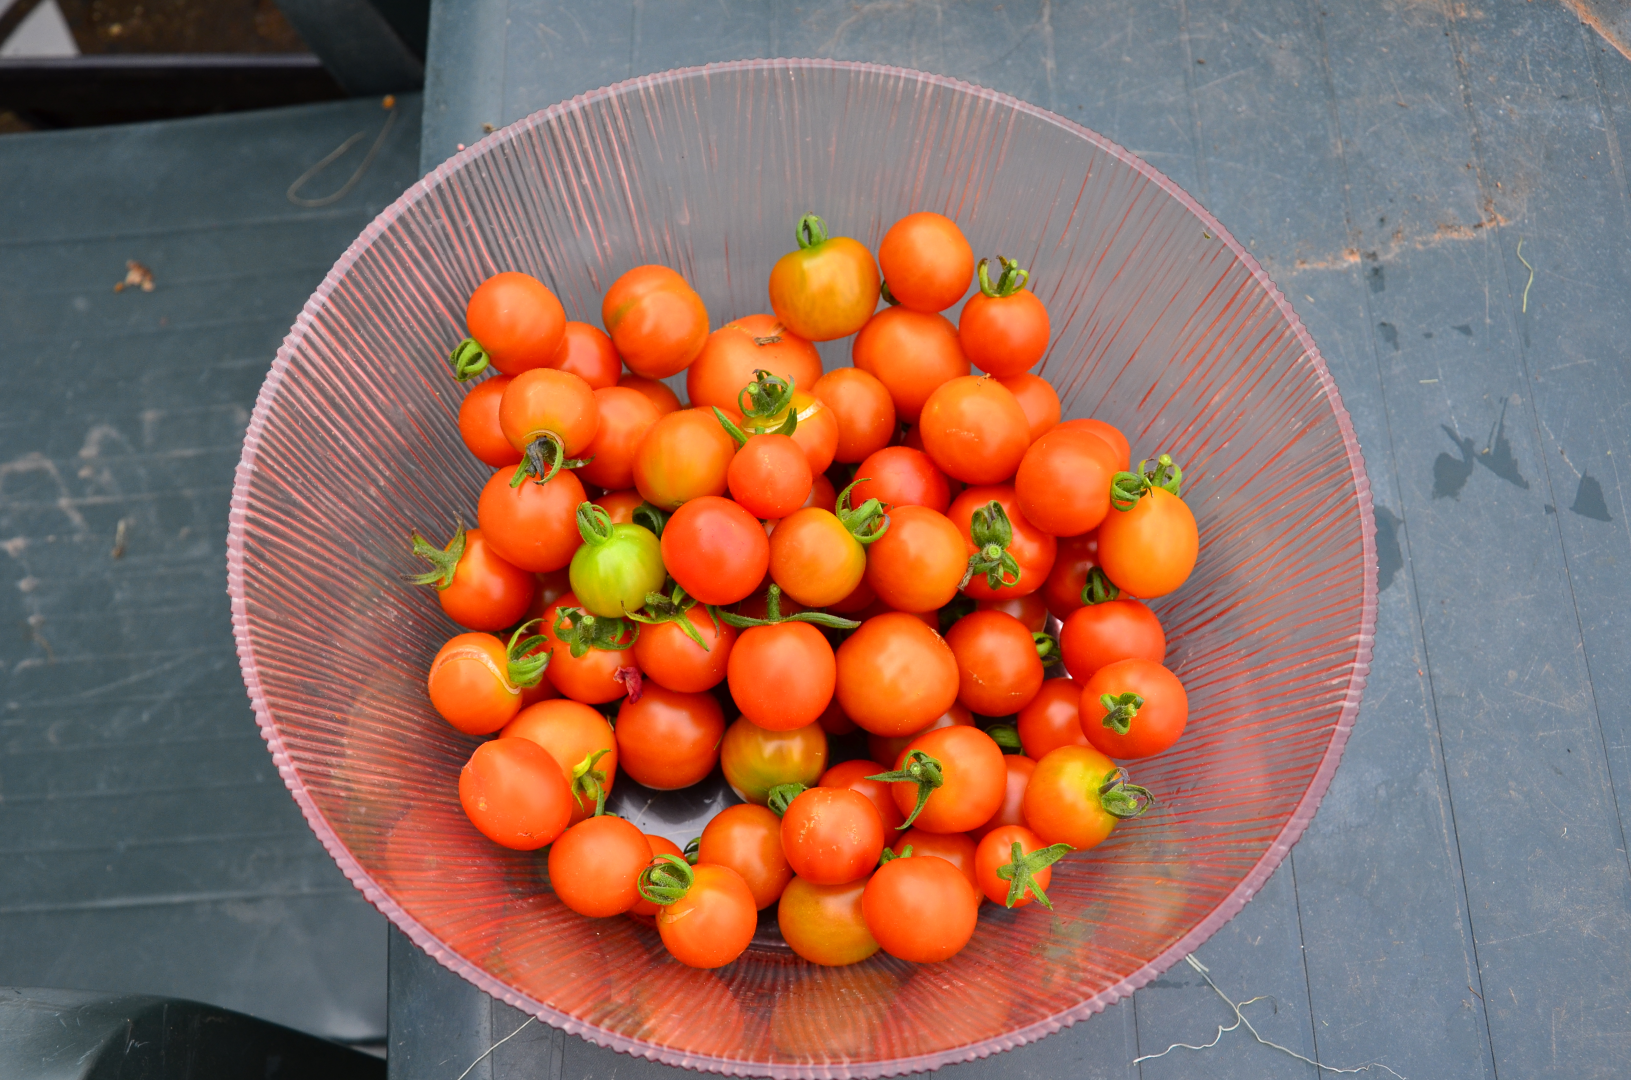 Bowl of picked tomatoes